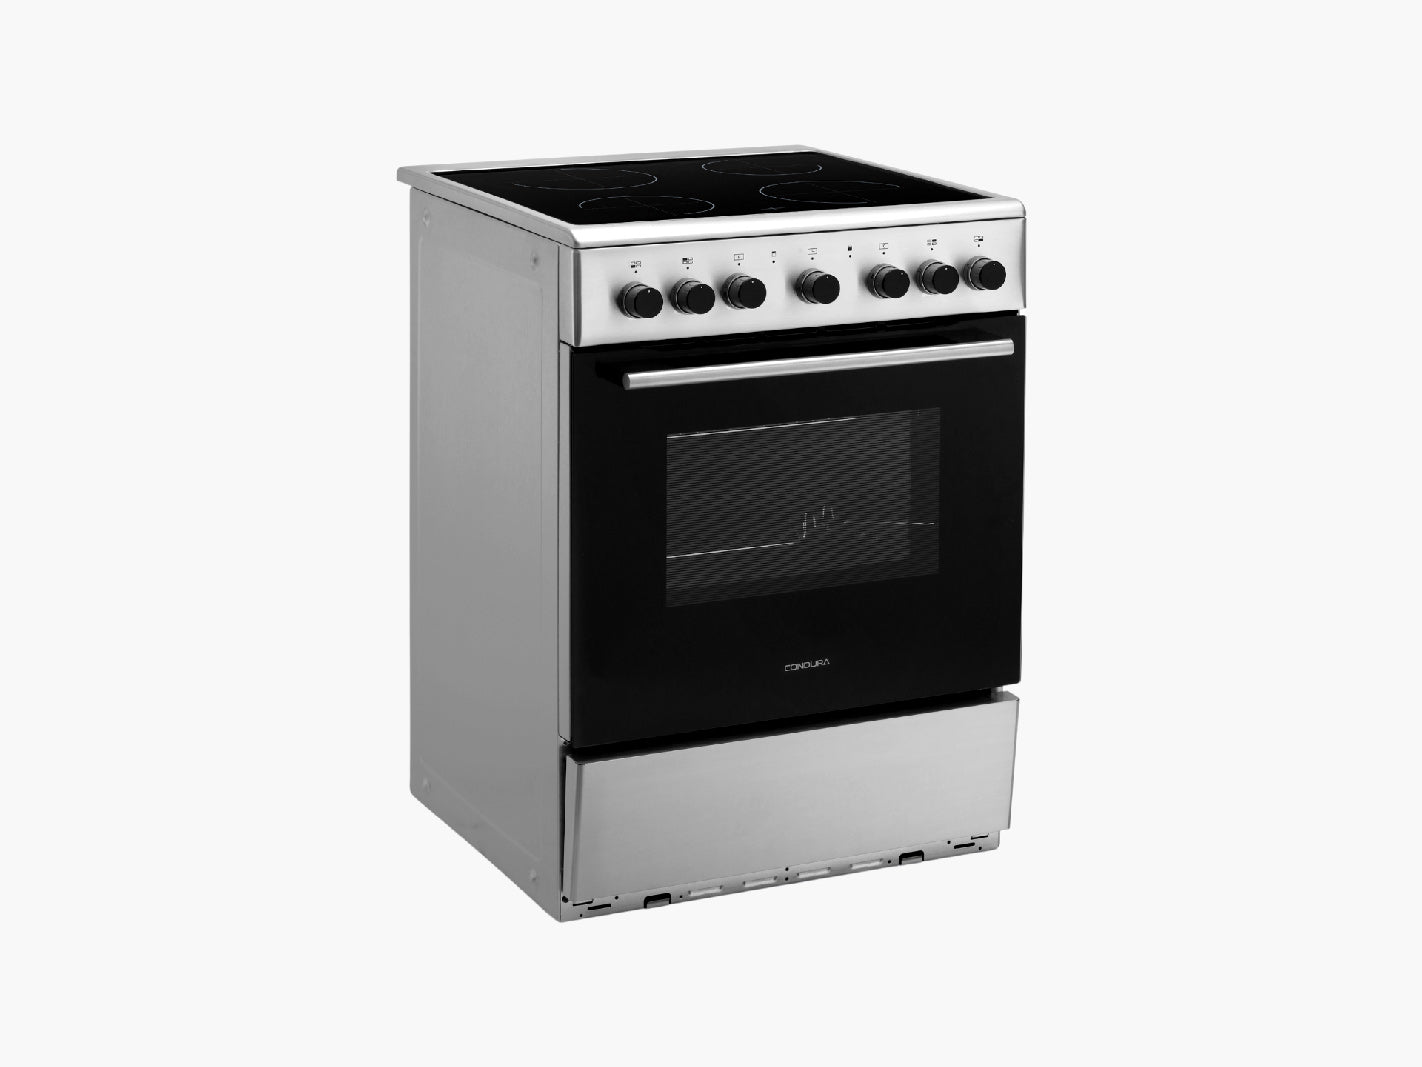 condura-free-standing-ceramic-top-cooker-60-centimeter-right-side-view-mang-kosme